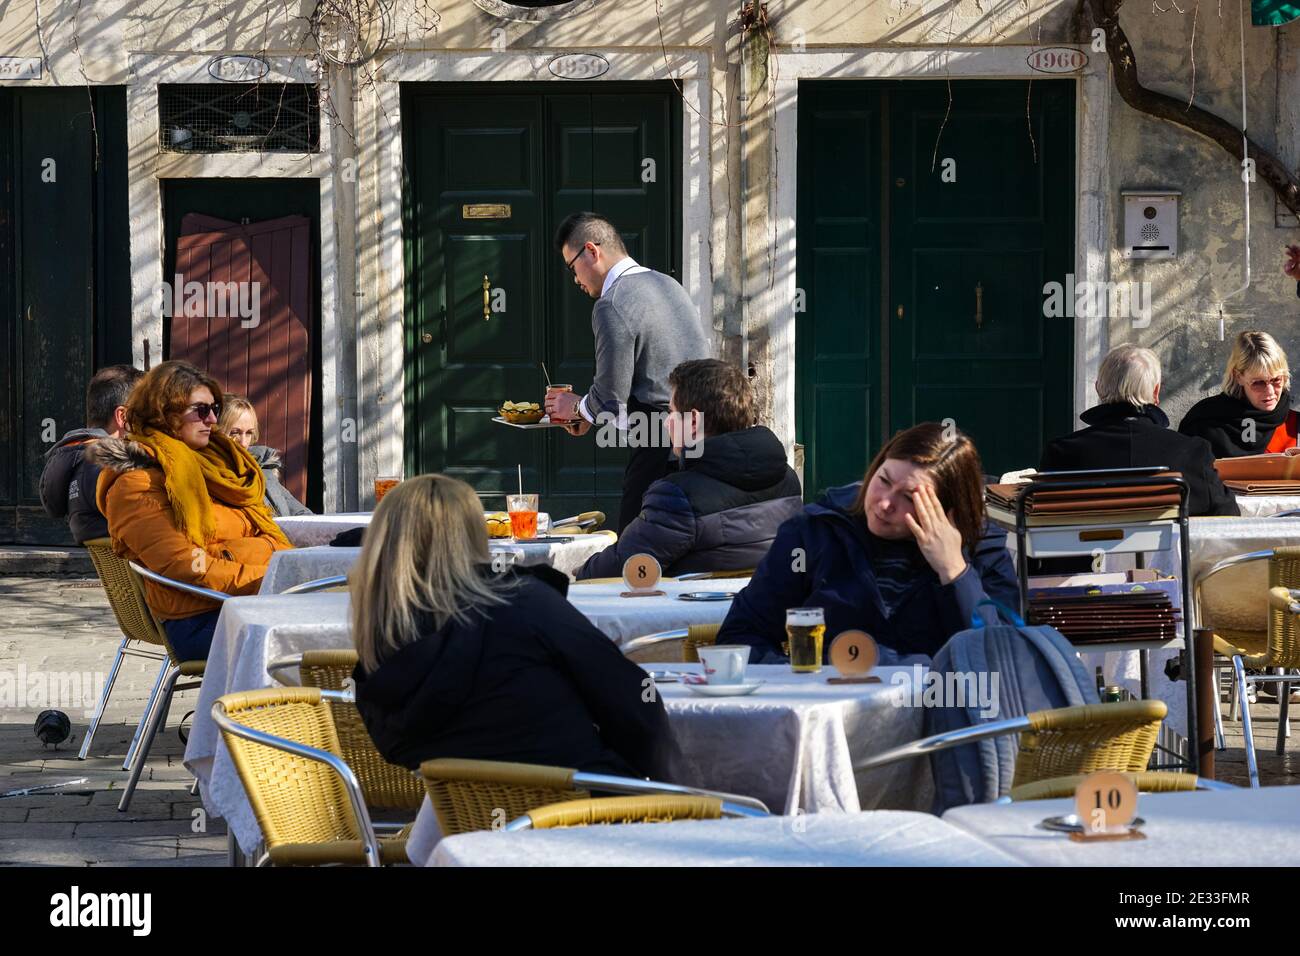 People sitting outside restaurant on Campo San Polo in Venice, Italy Stock Photo